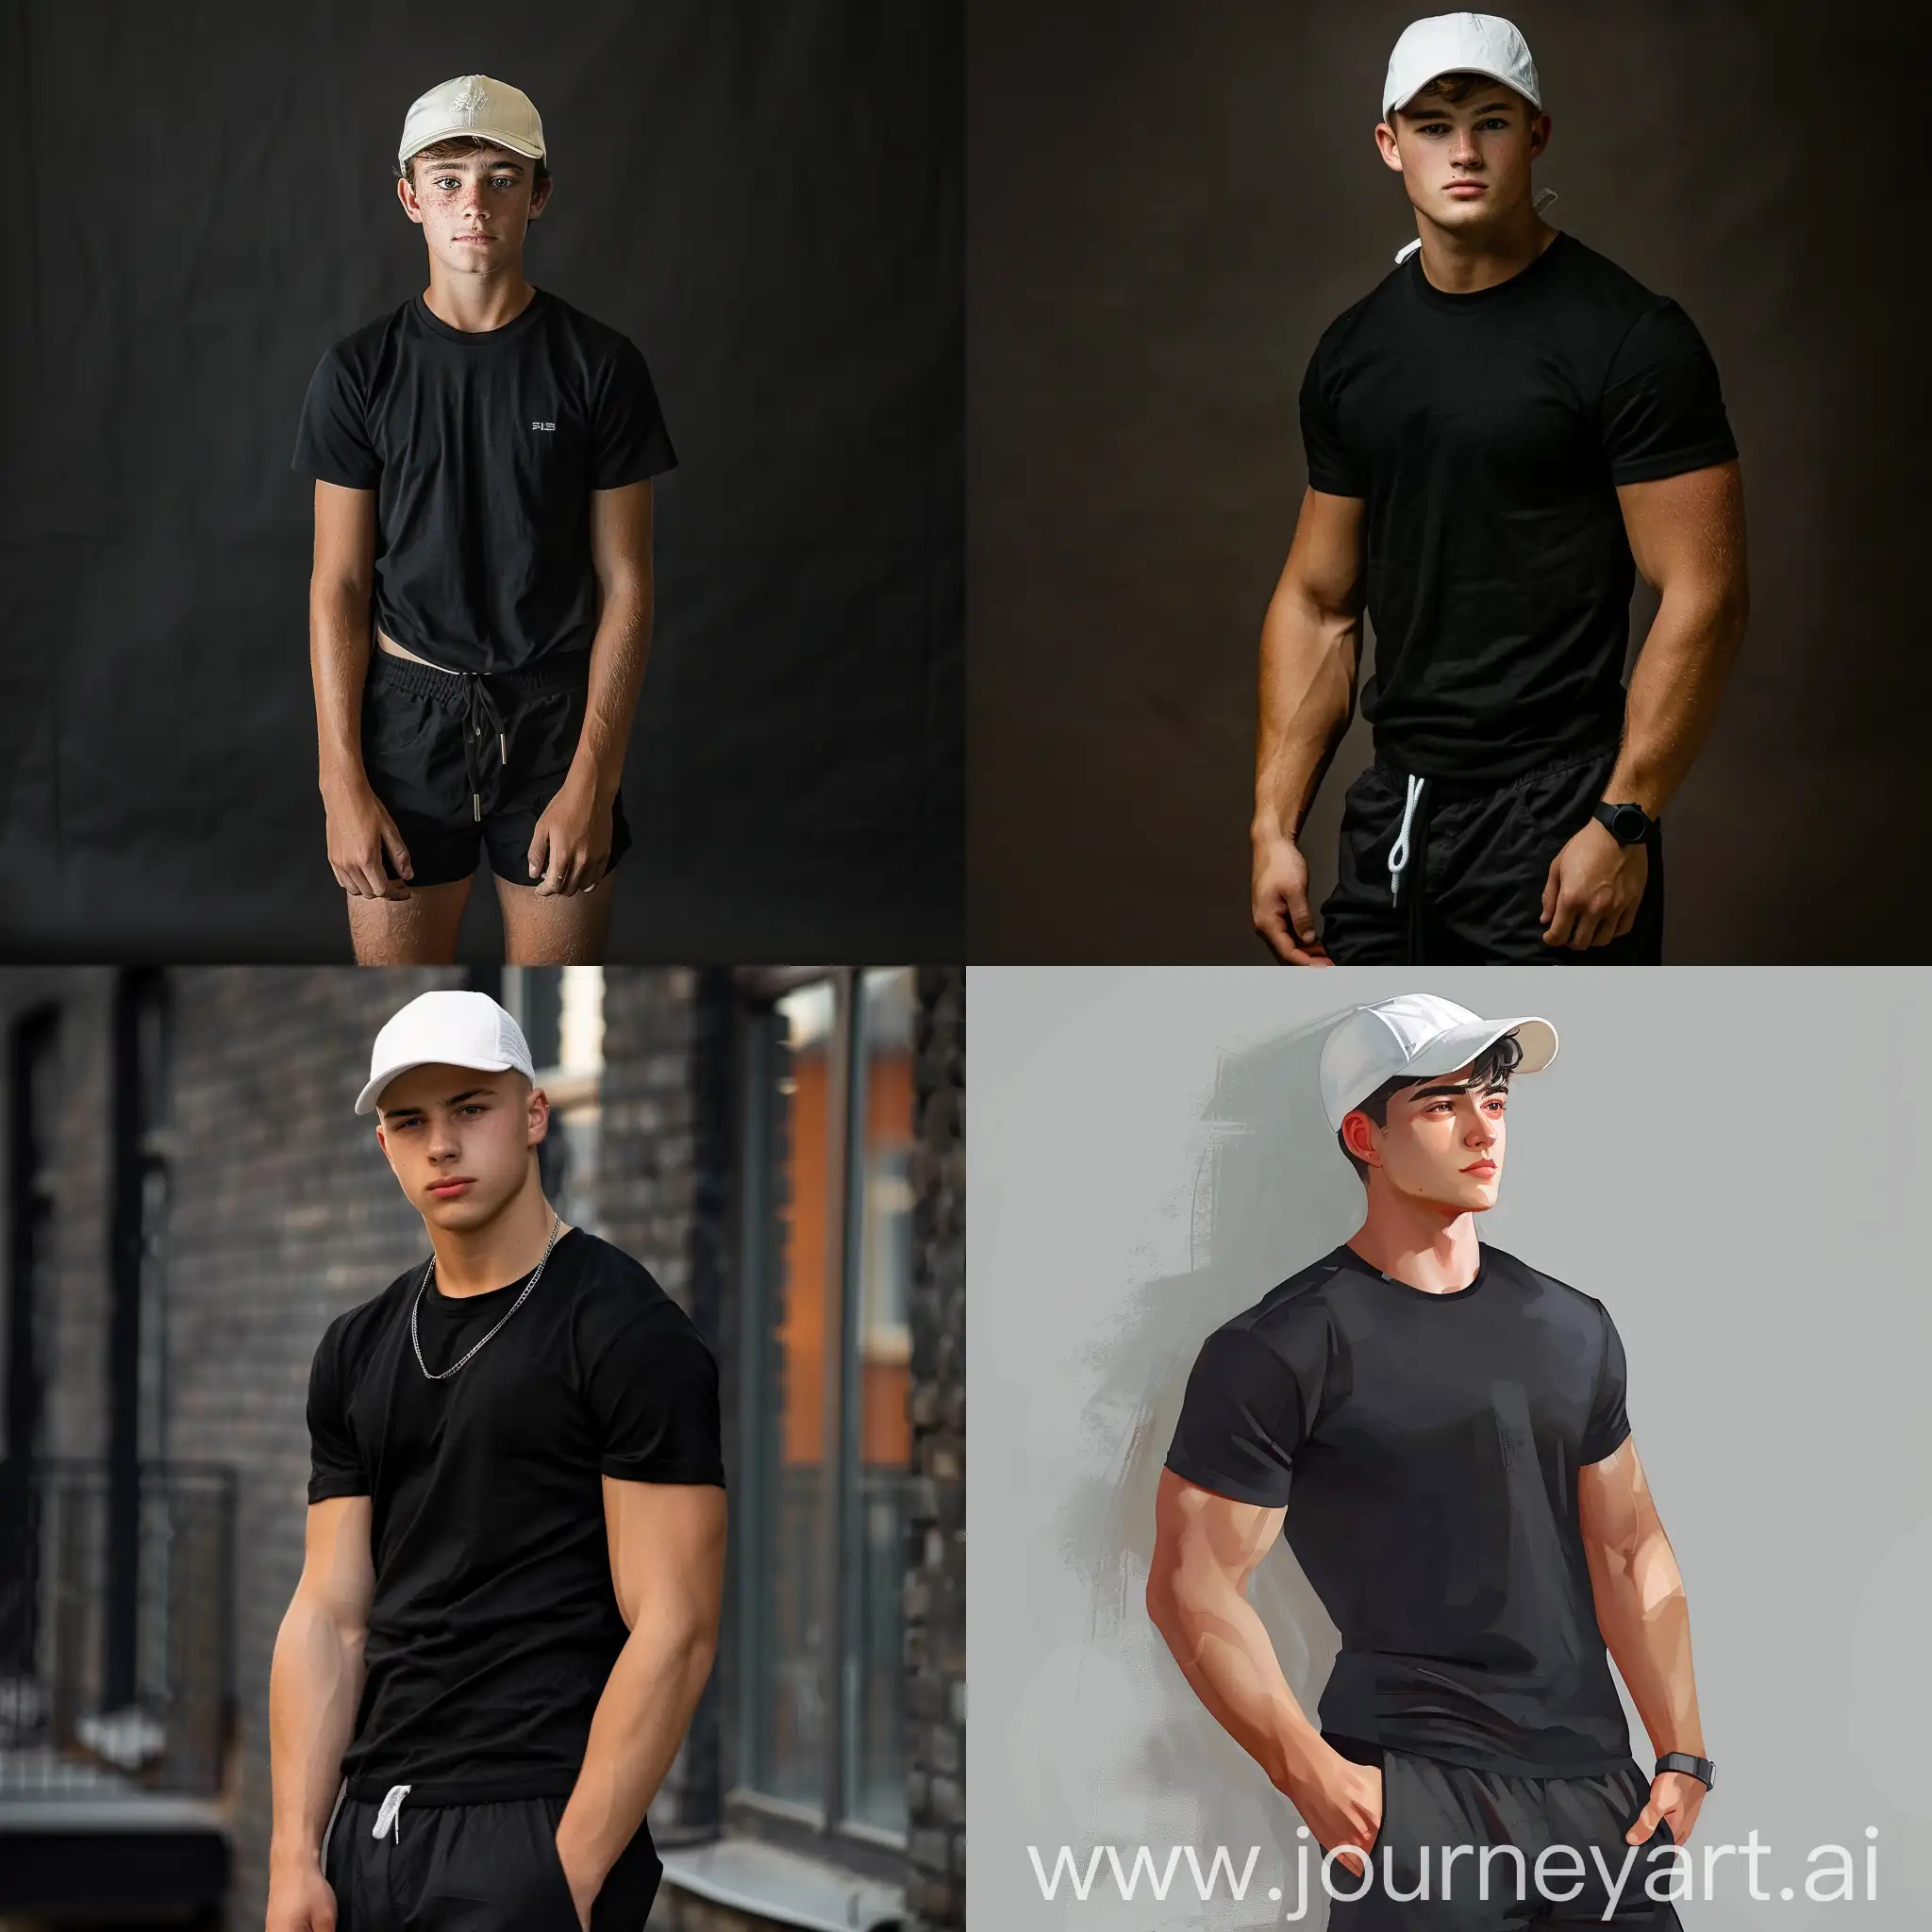 A muscular build handsome 16-year-old boy, wearing black shorts, a black t-shirt and a white baseball cap